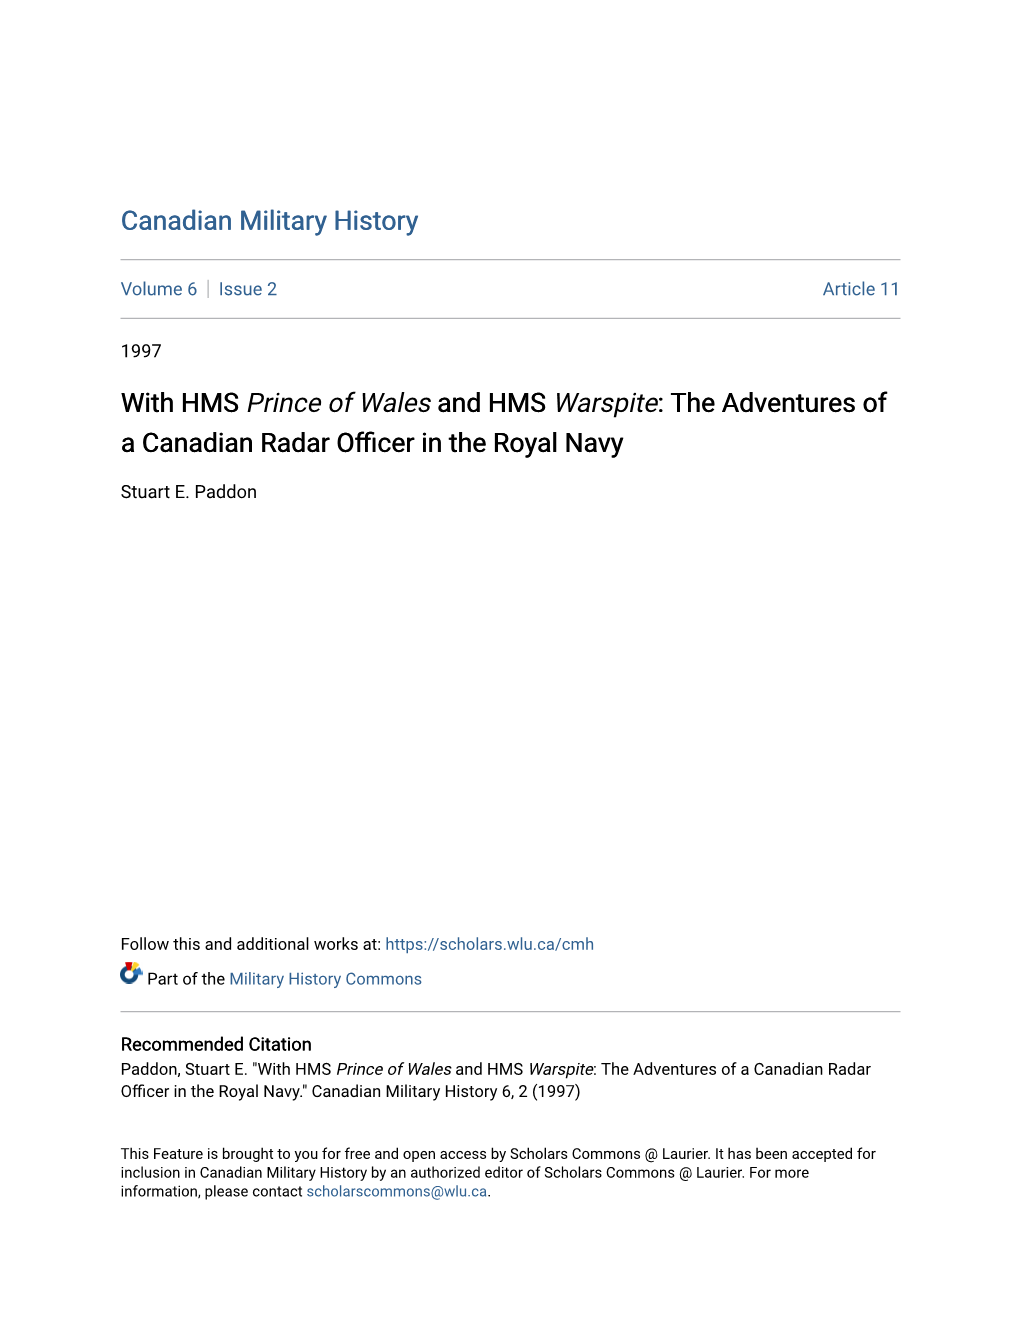 With HMS Prince of Wales and HMS Warspite: the Adventures of a Canadian Radar Officer in the Yro Al Navy